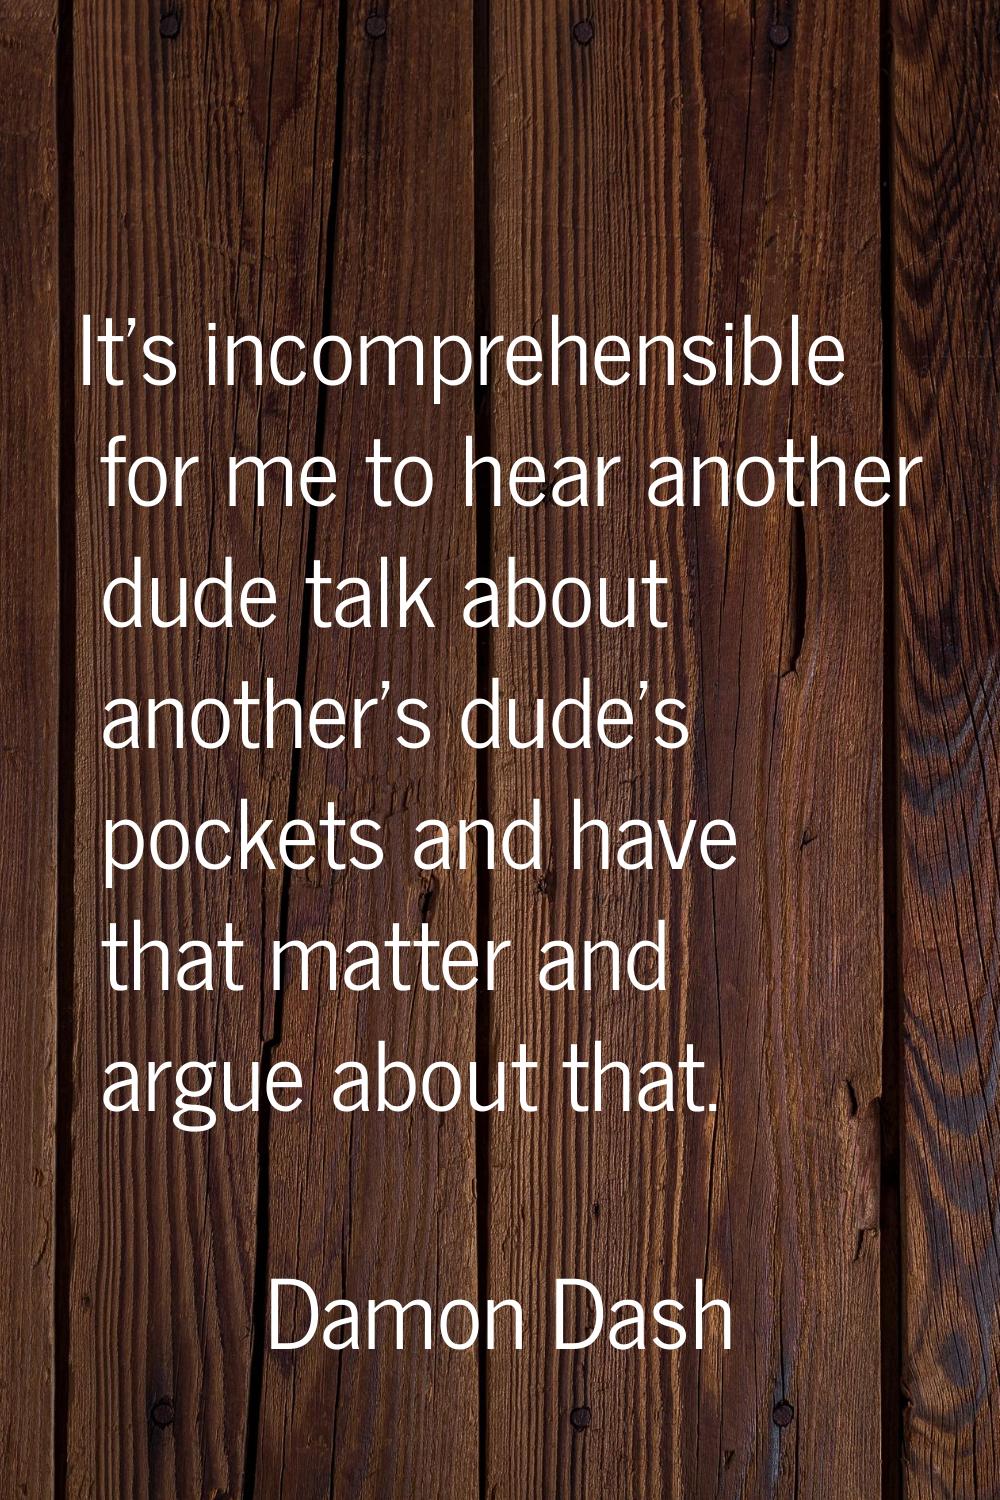 It's incomprehensible for me to hear another dude talk about another's dude's pockets and have that